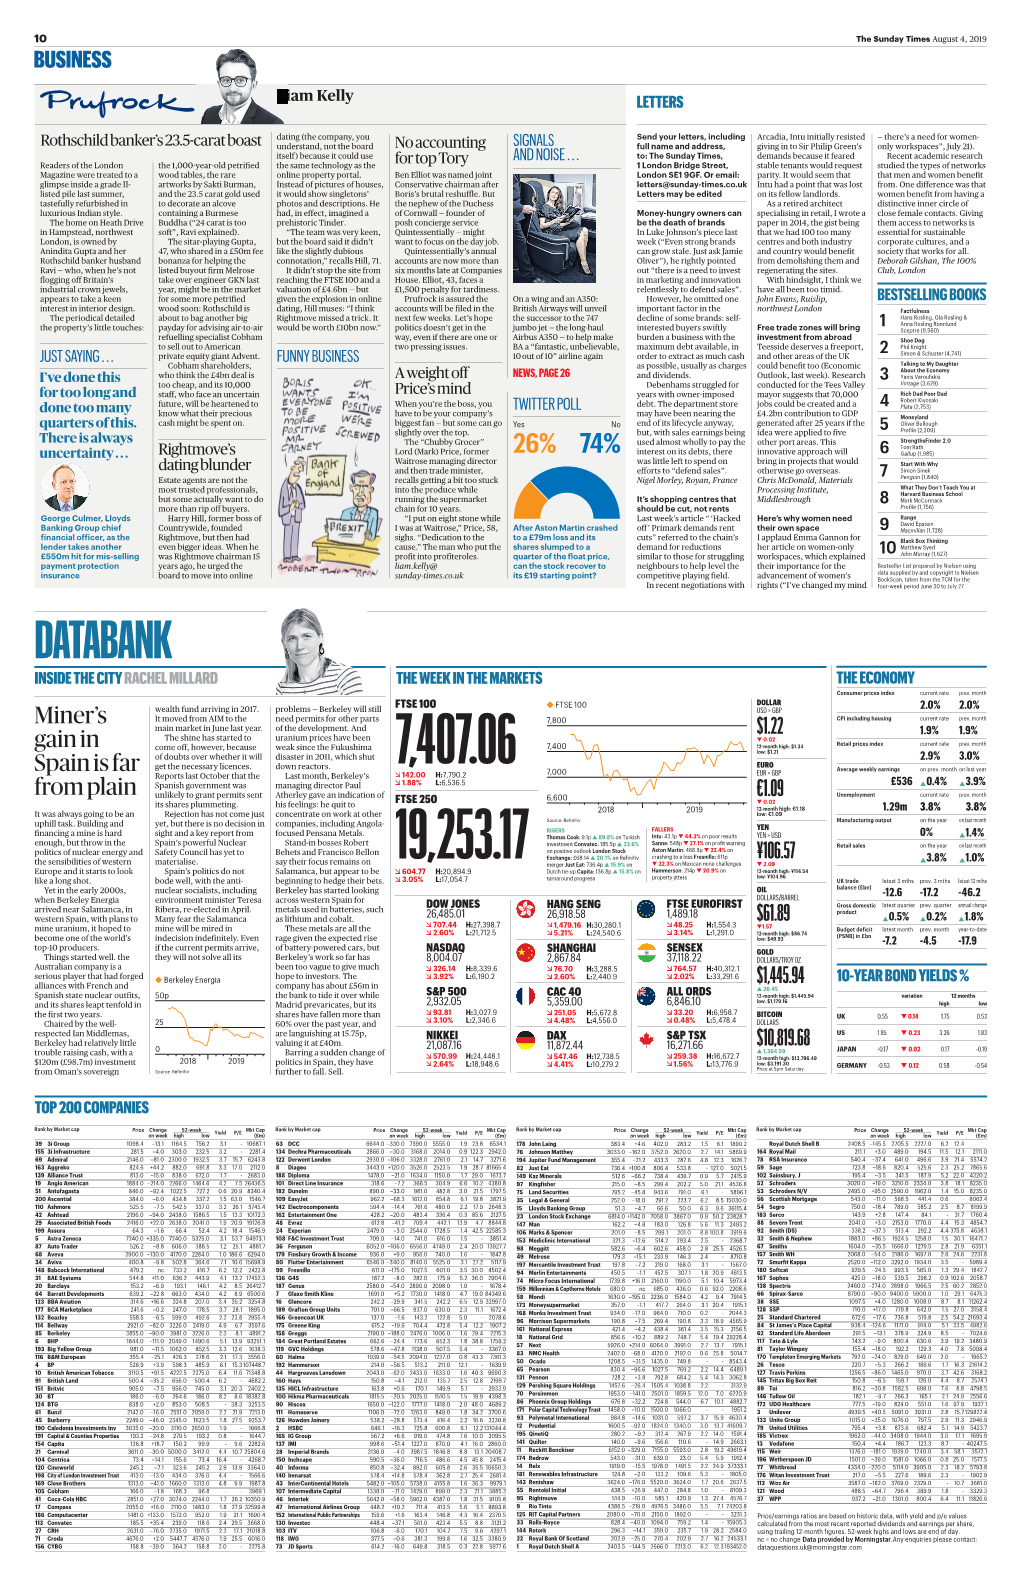 DATABANK INSIDE the CITY RACHEL MILLARD the WEEK in the MARKETS the ECONOMY Consumer Prices Index Current Rate Prev